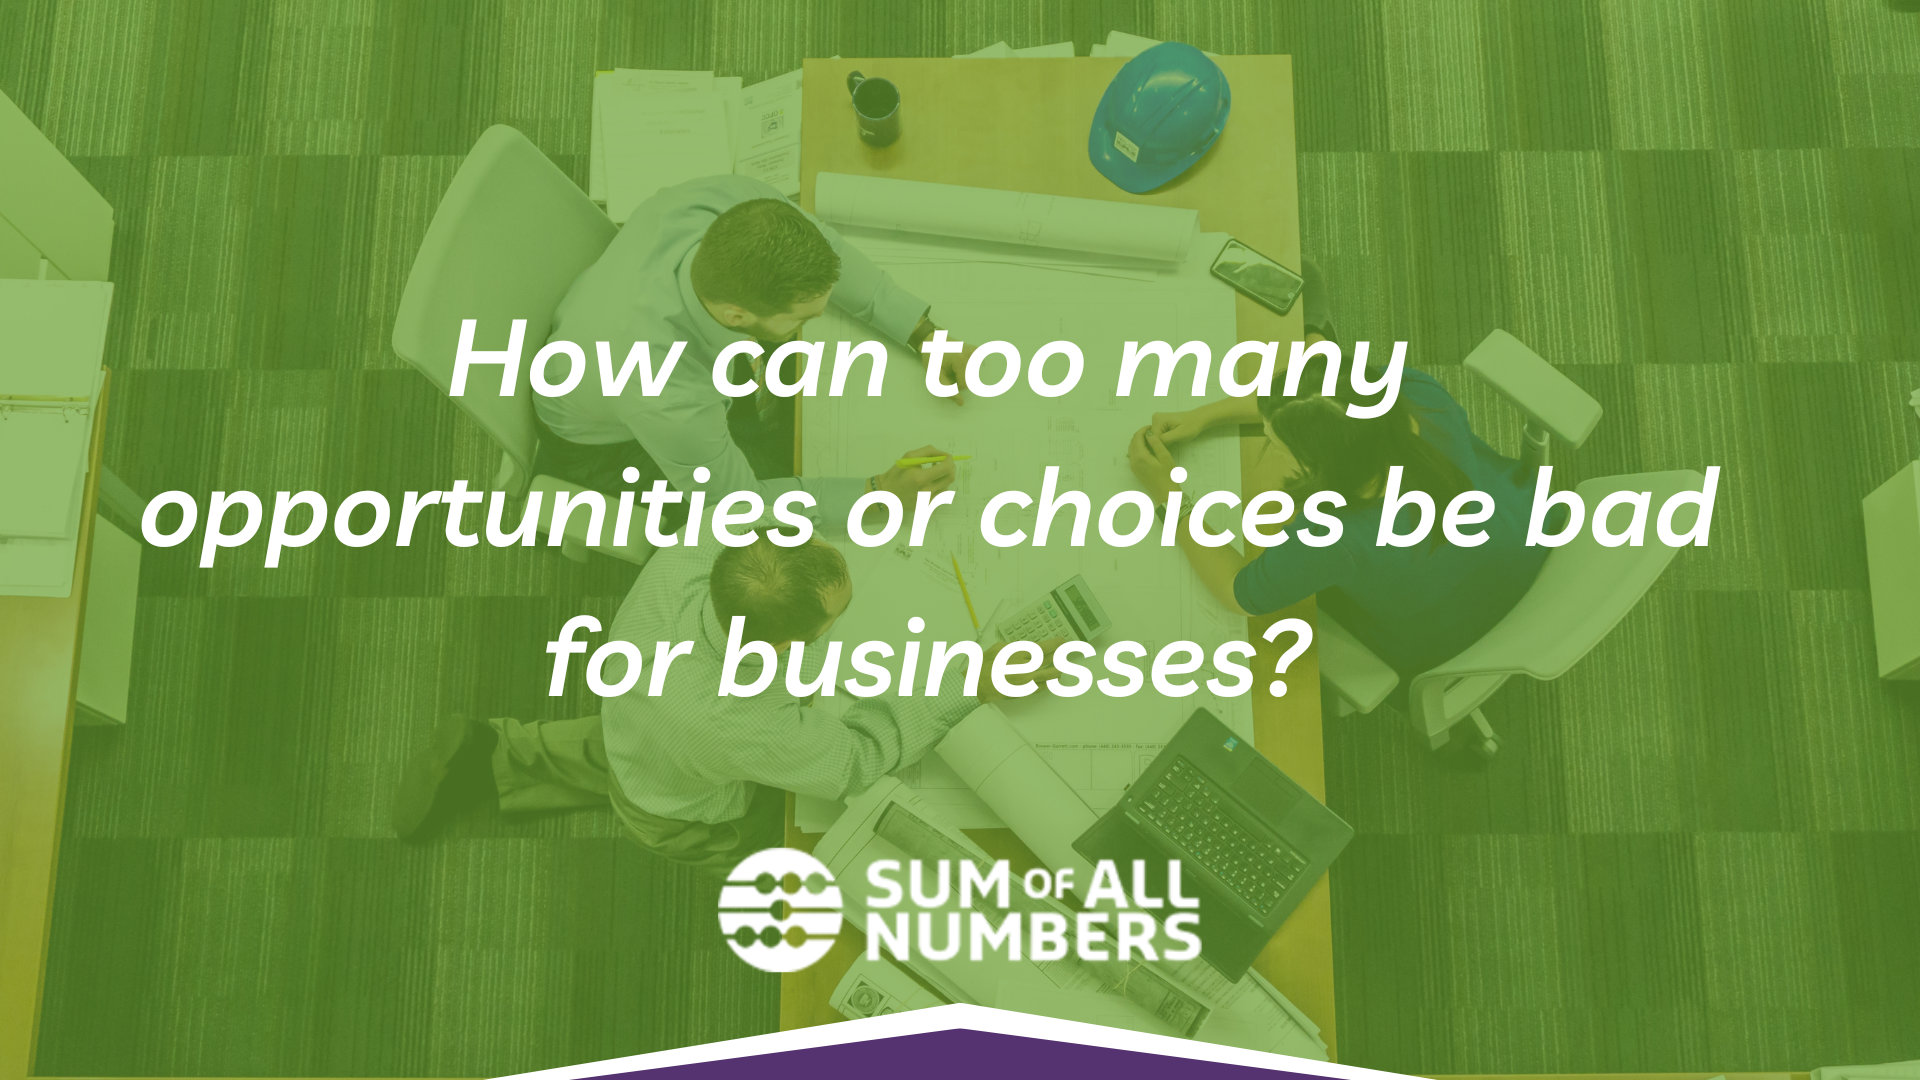 How can too many opportunities or choices be bad for businesses?